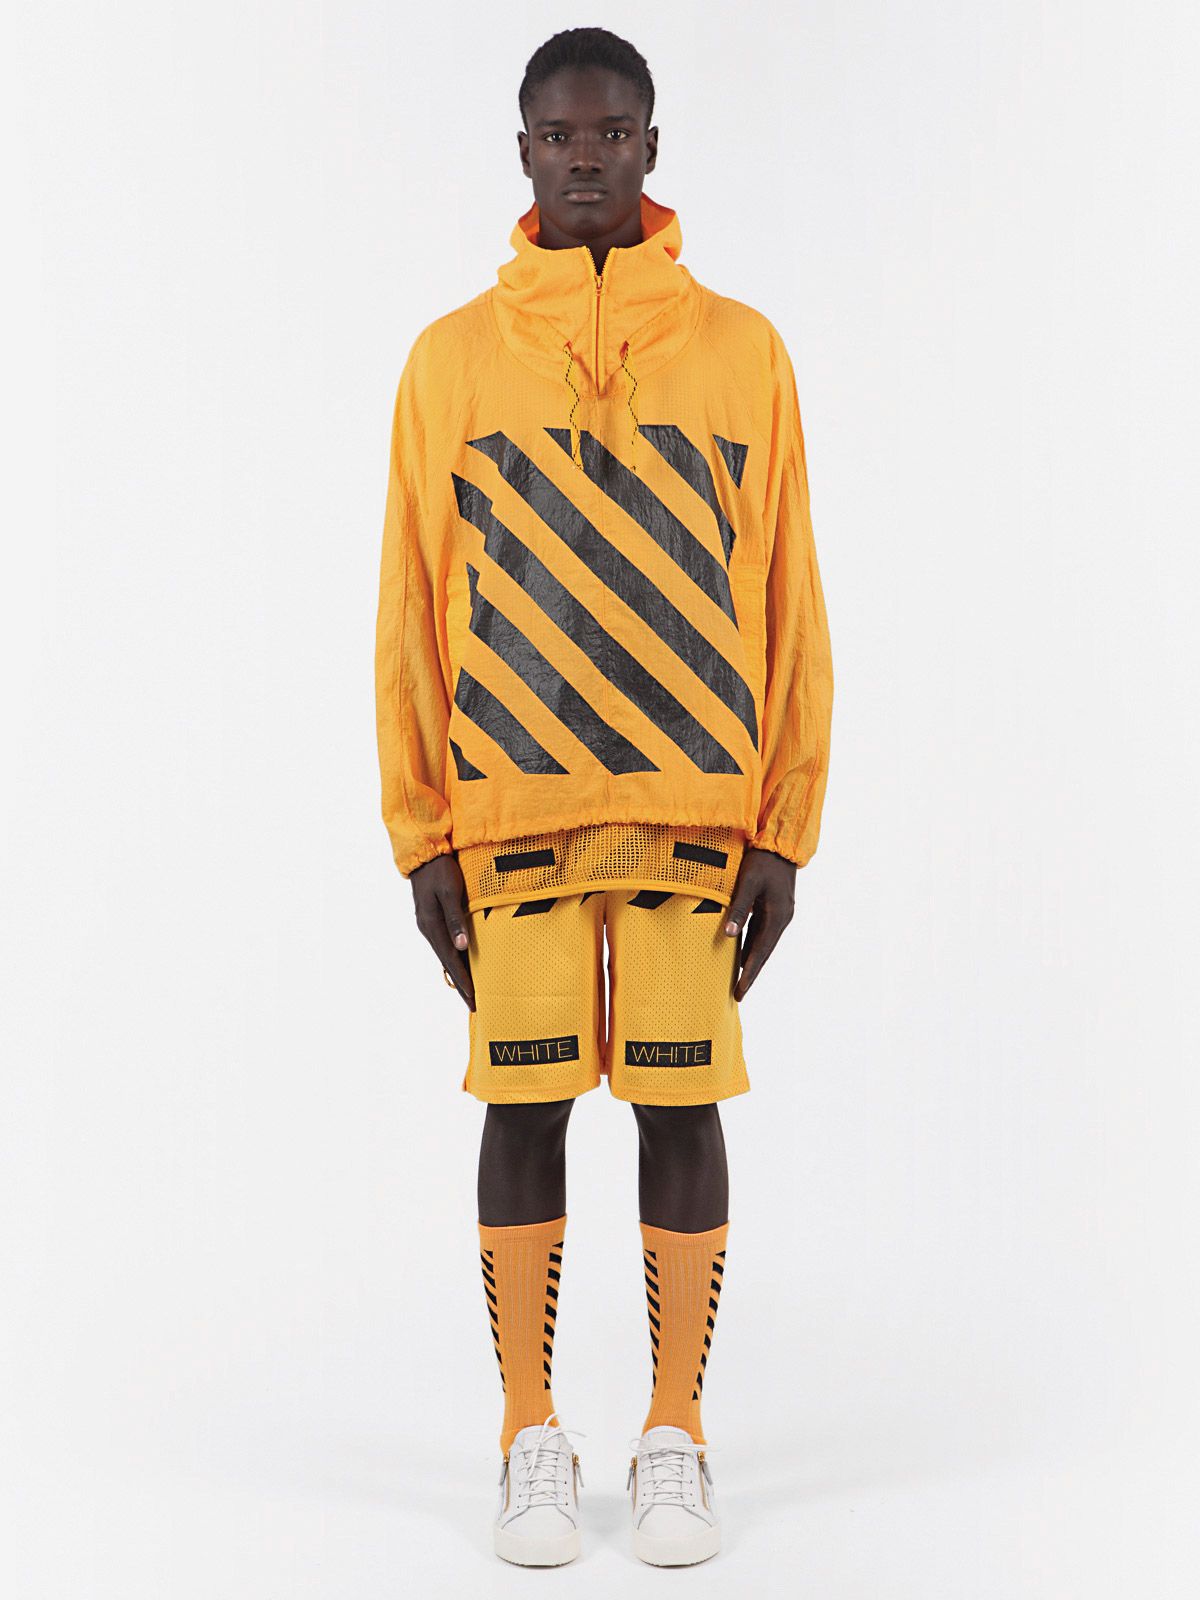 Virgil Abloh At Louis Vuitton: His First Collection